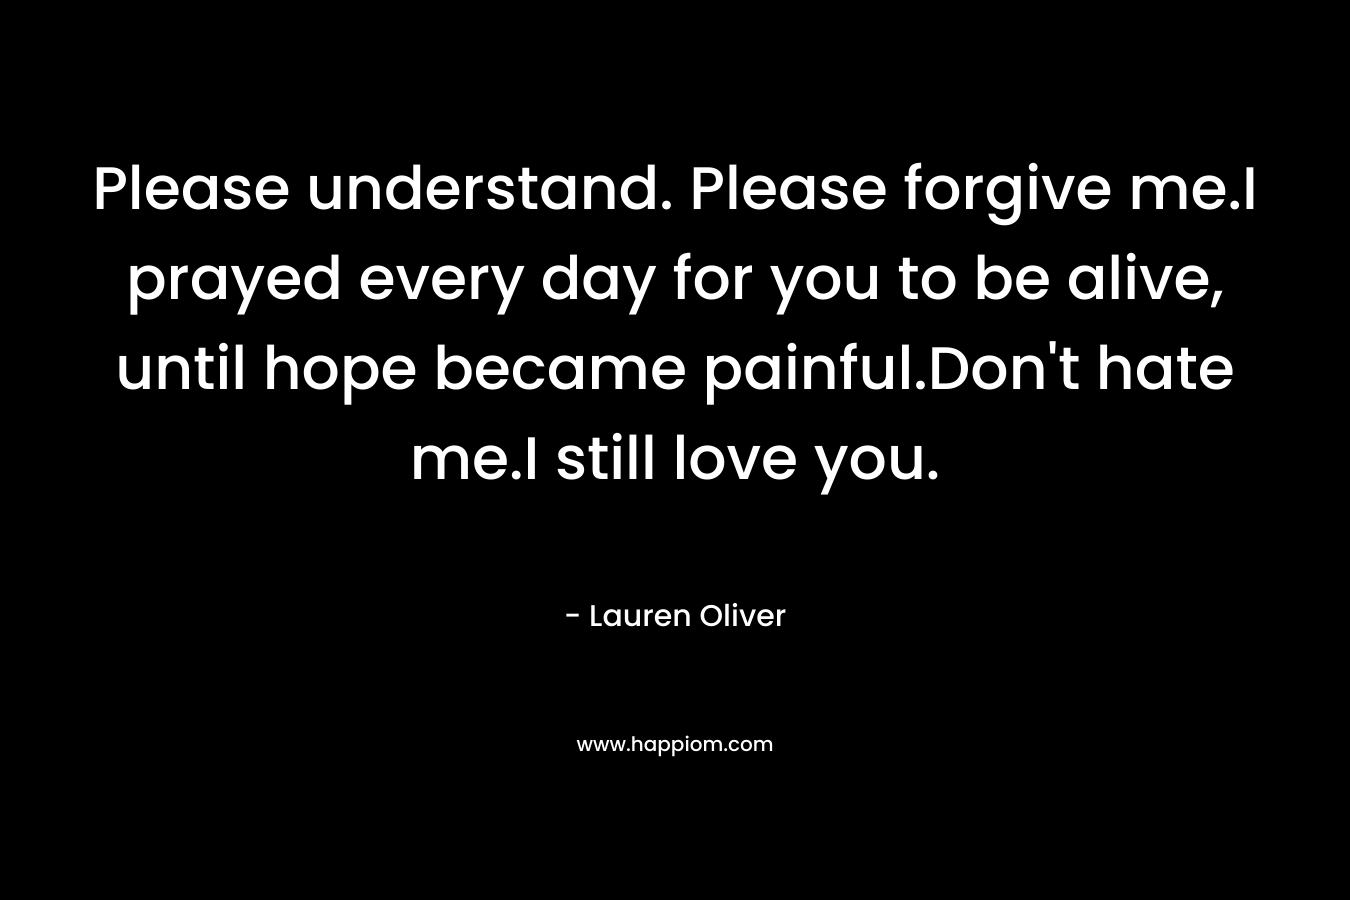 Please understand. Please forgive me.I prayed every day for you to be alive, until hope became painful.Don't hate me.I still love you.